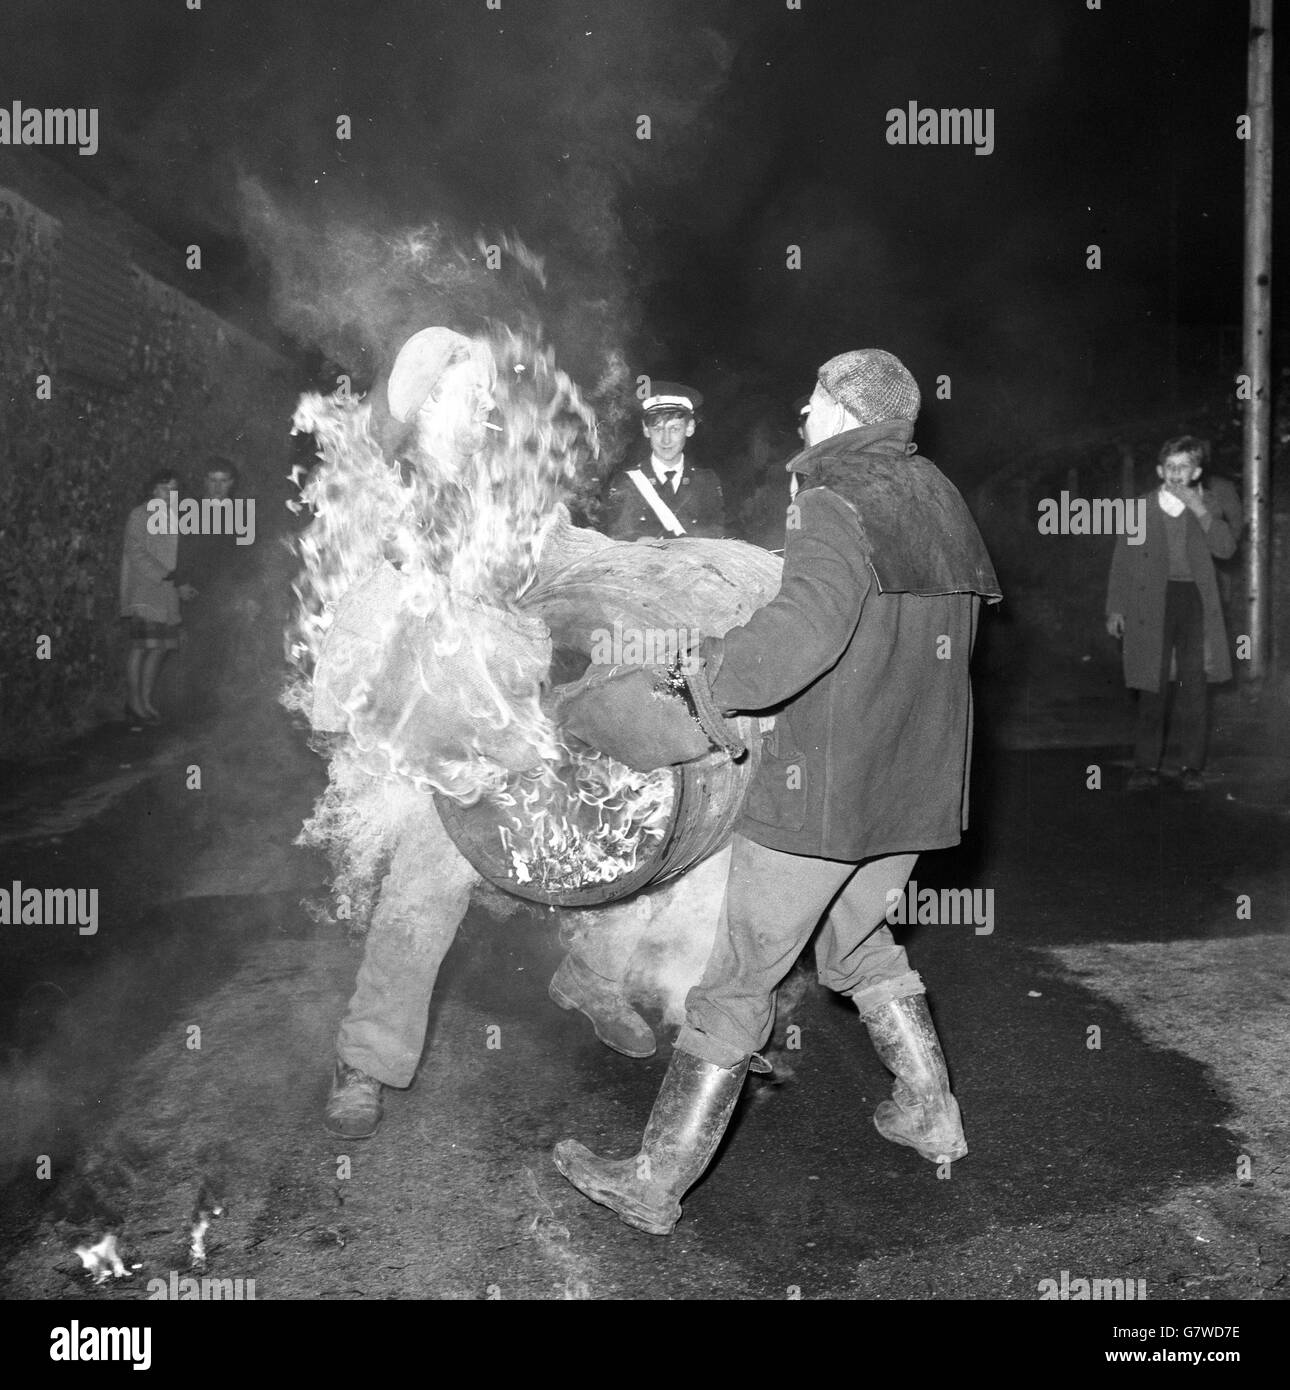 Tar Barrel Burning Ceremony - Ottery St Mary's. Battle begins as one man tries to capture the flaming burden from another. Stock Photo